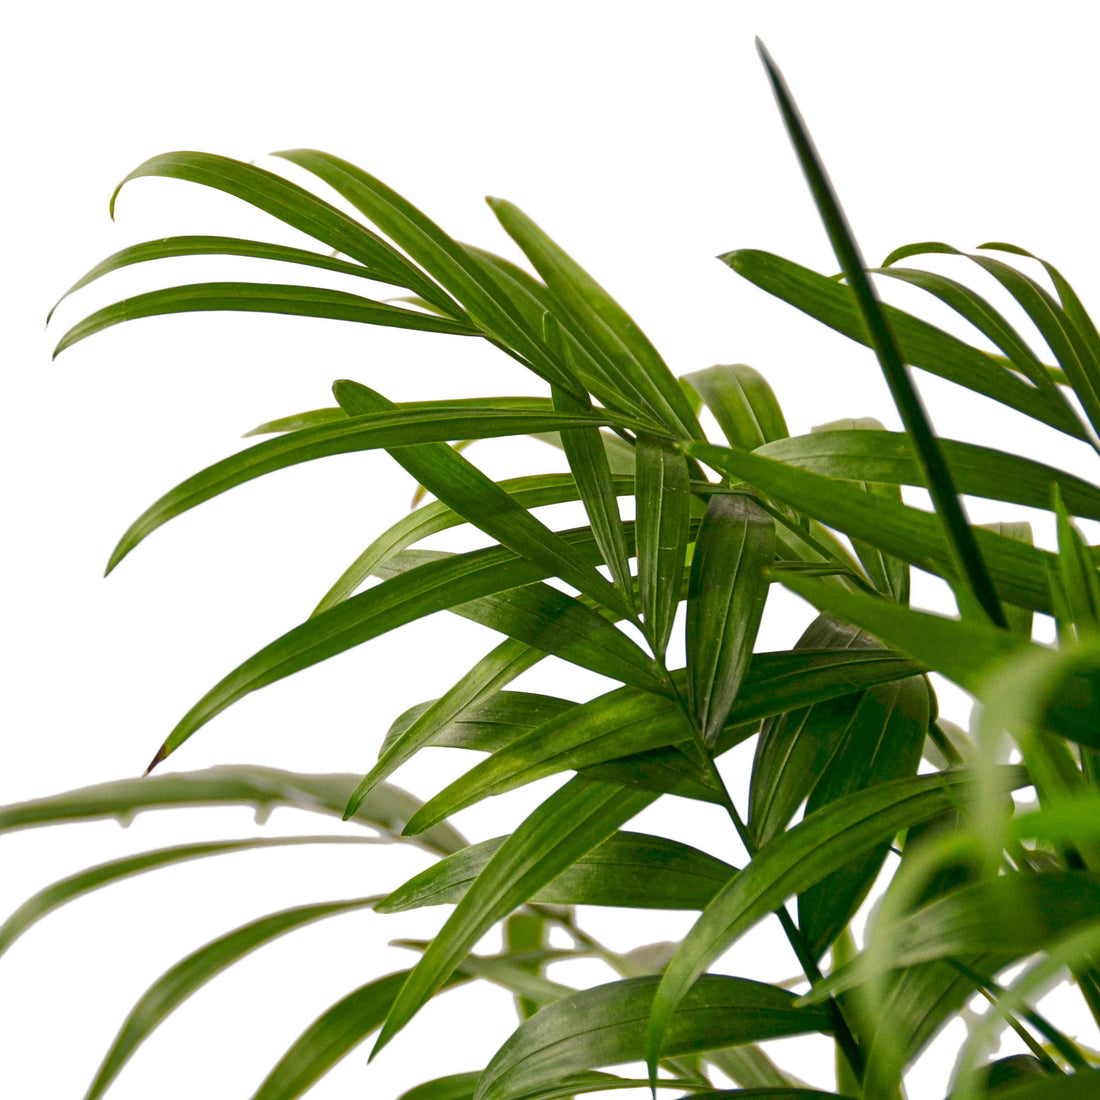 Parlor Palm - Hive Plants - Indoor &amp; Outdoor Plants